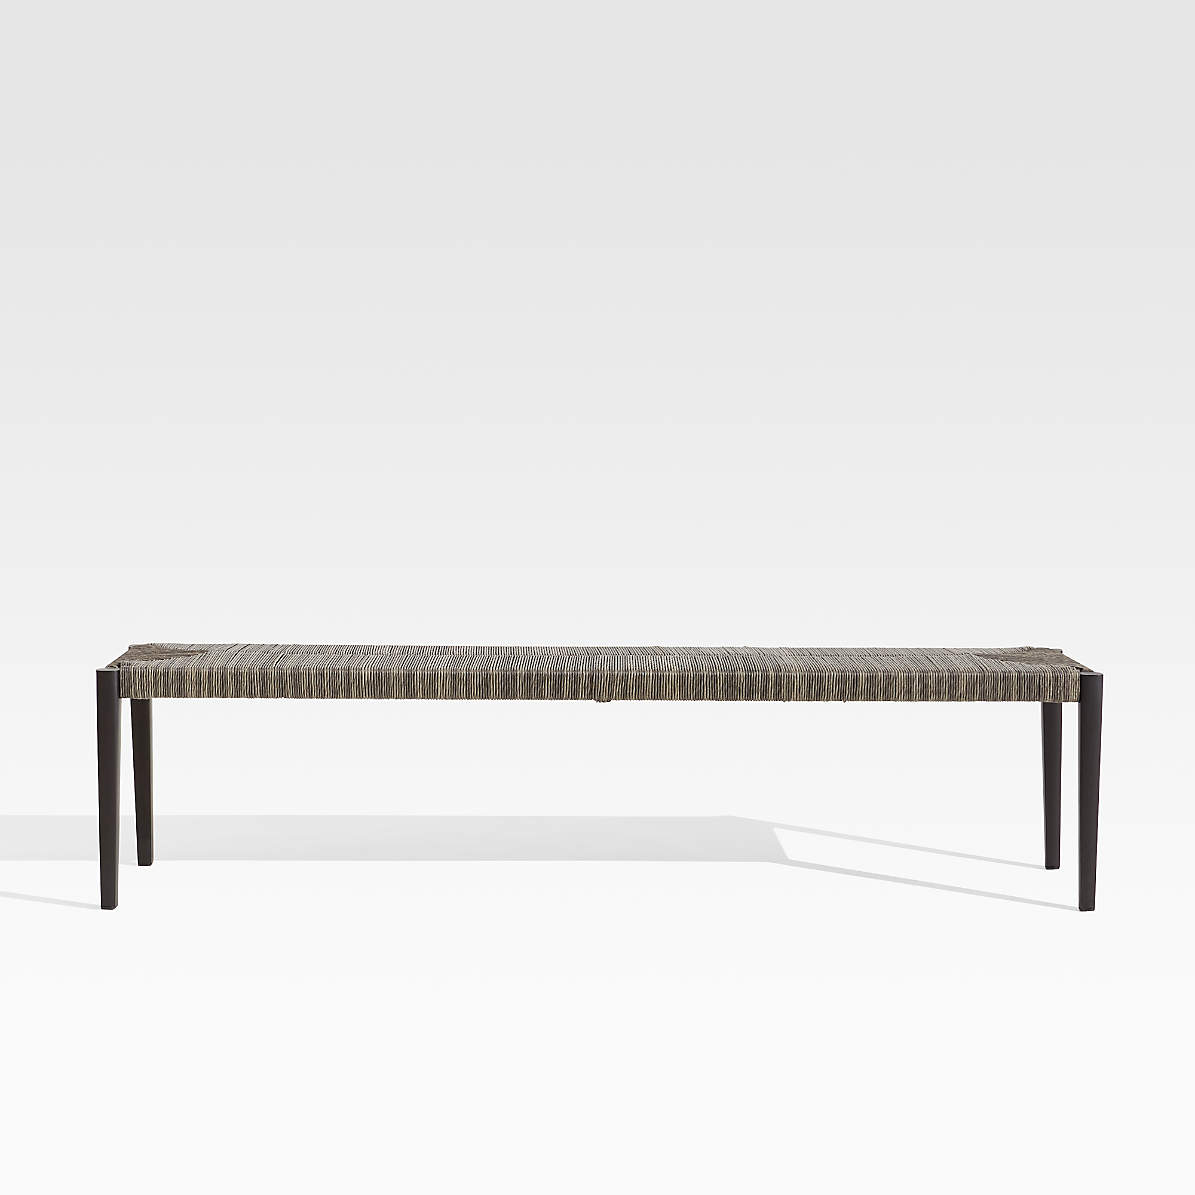 Railay All Weather Woven Wicker Dining Bench Reviews Crate And Barrel